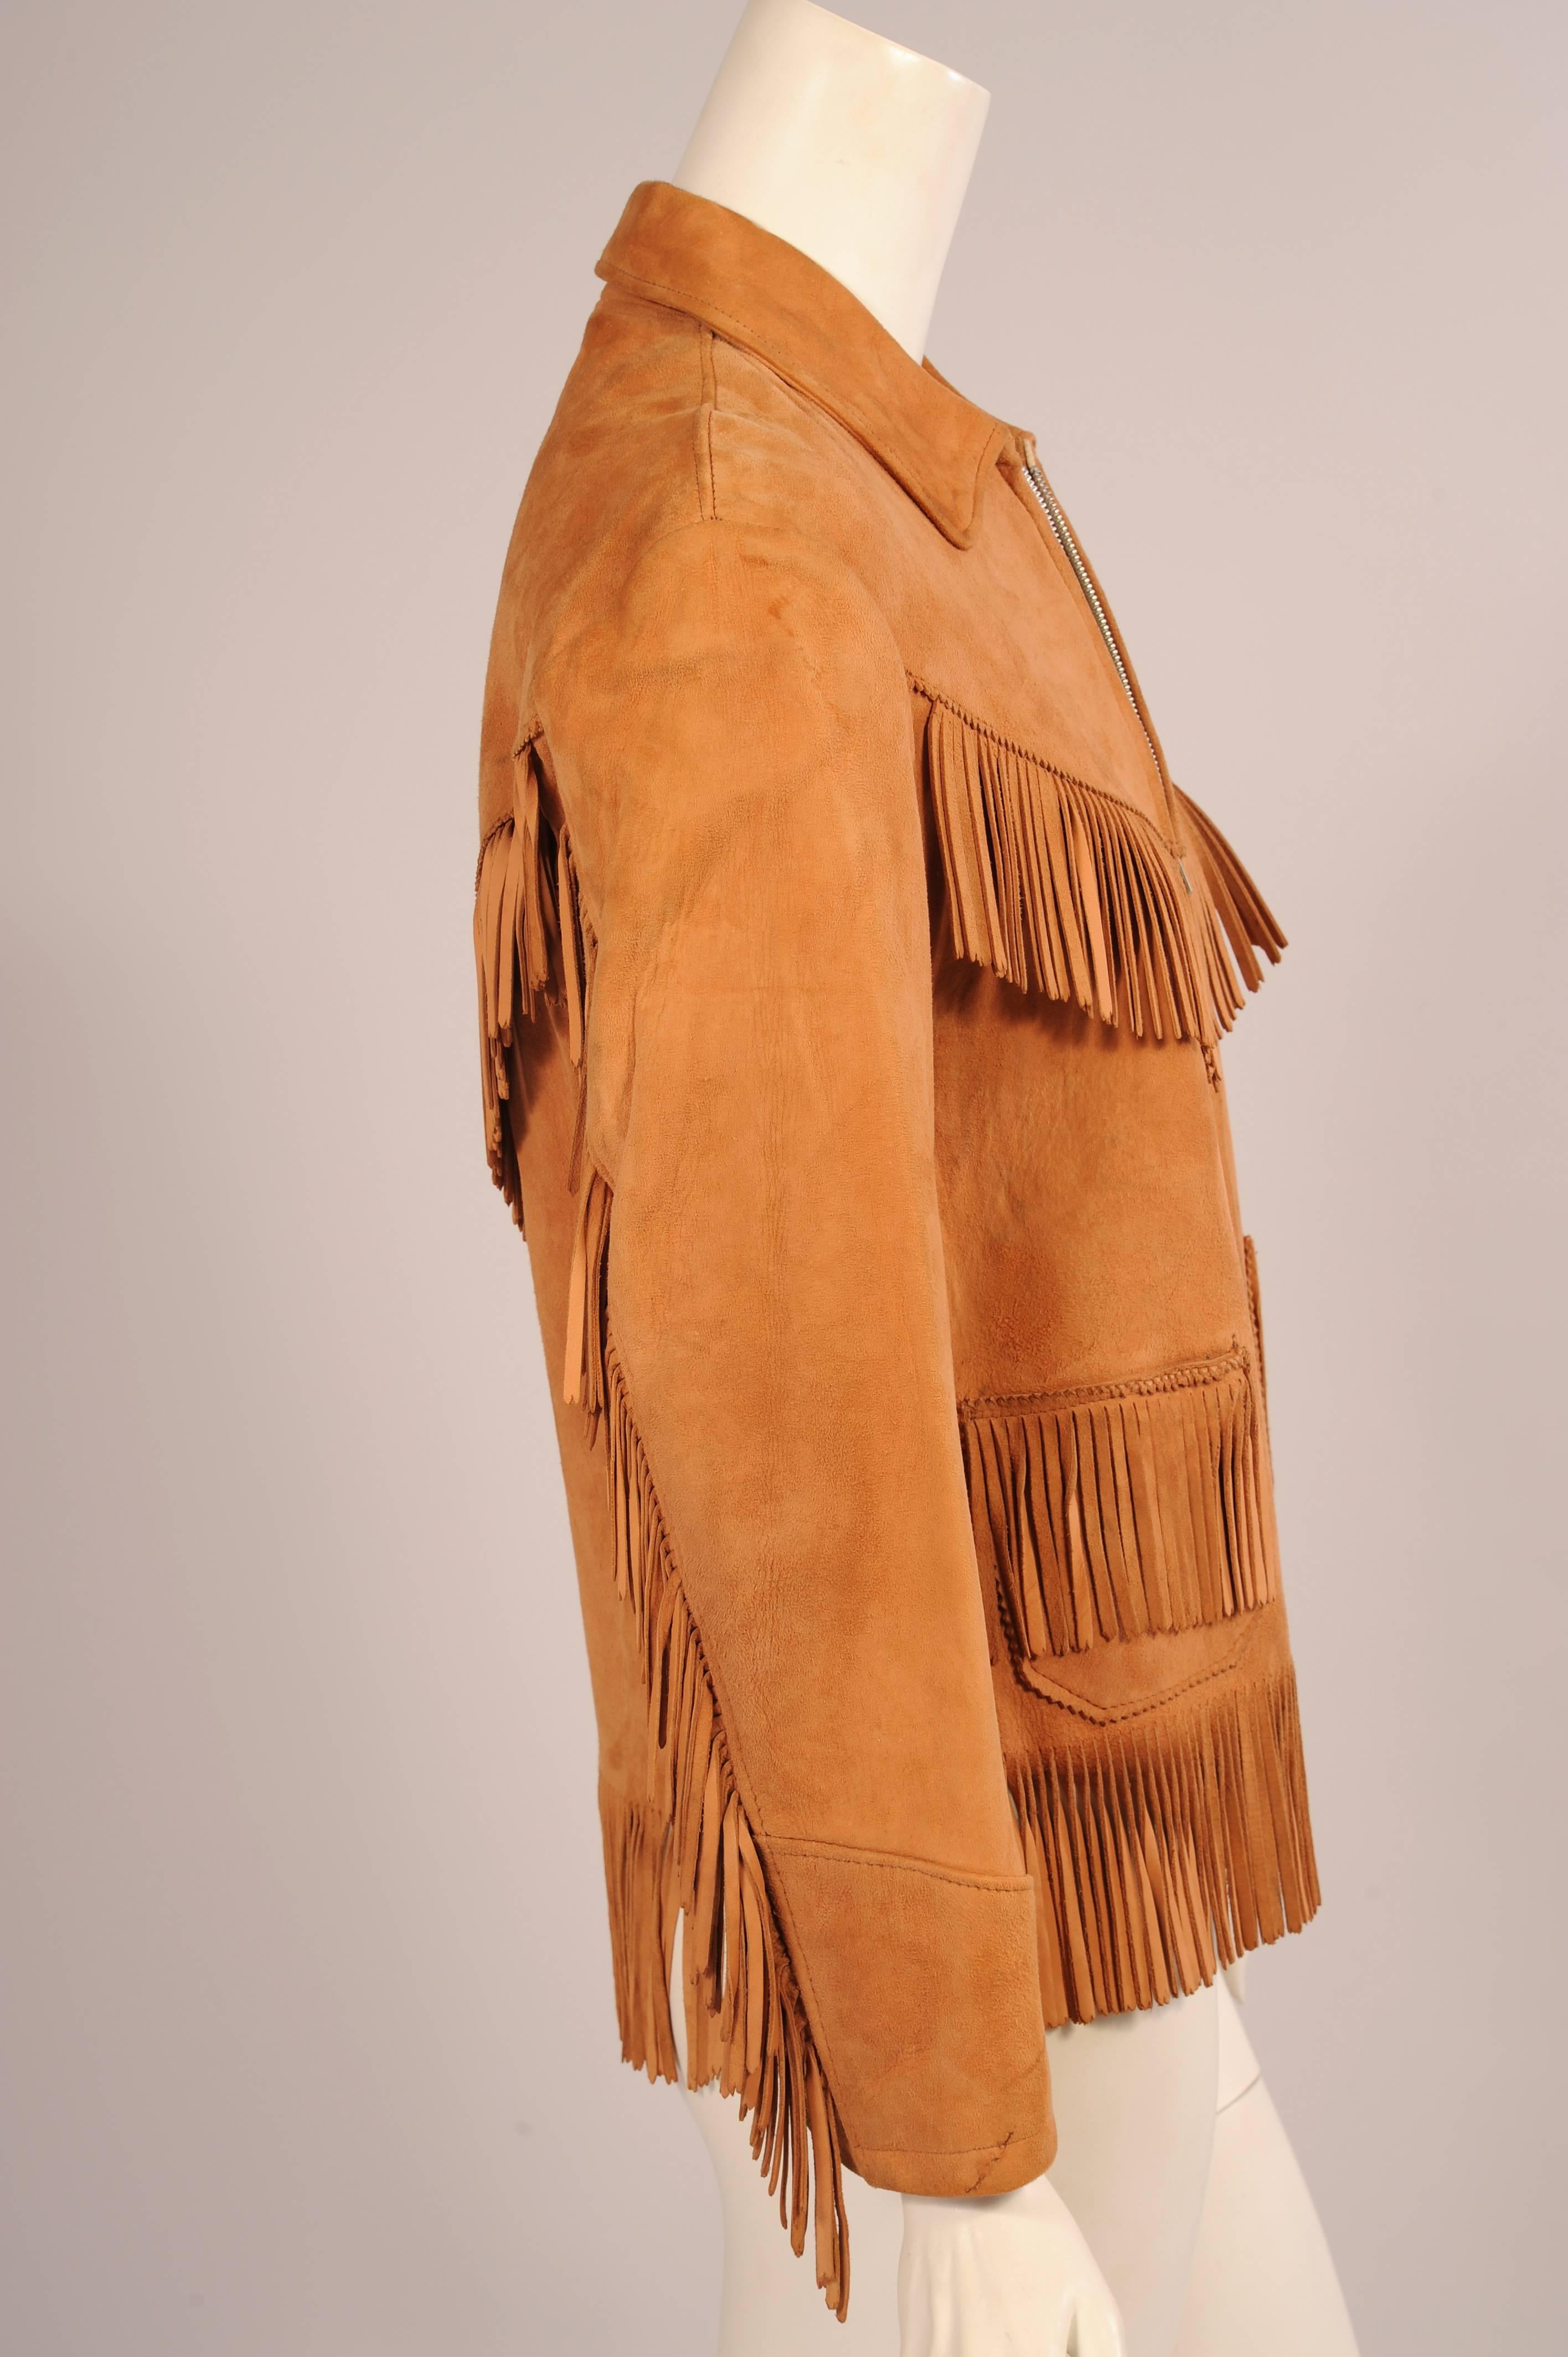 This Western style suede jacket has fringe trim on the front and back yokes, the sleeves, the pockets and the hemline. It has a metal zipper at the center front and it is fully lined . It is in excellent condition.
Measurements;
Shoulders